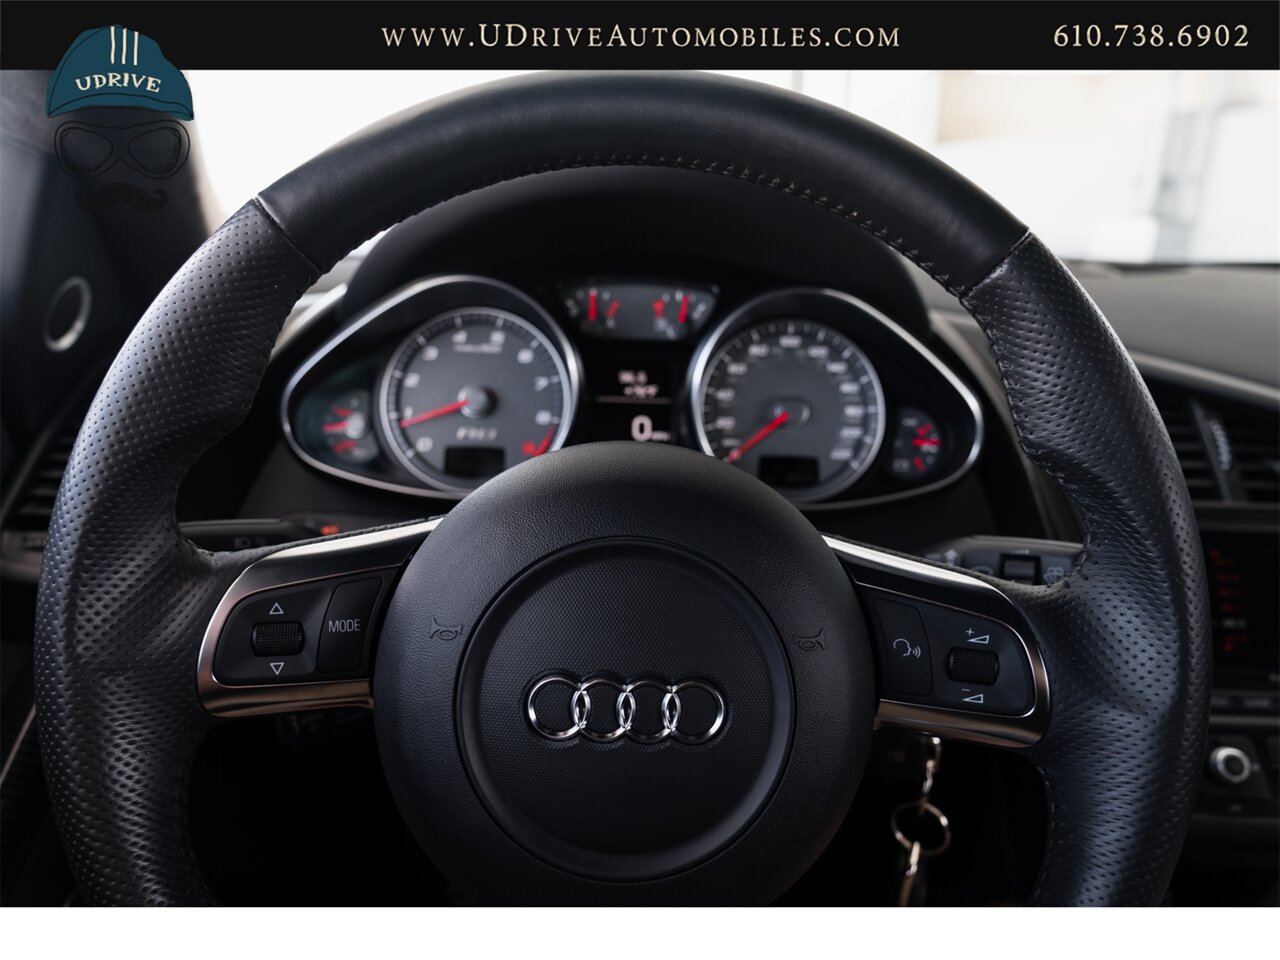 2012 Audi R8 4.2 Quattro  6 Speed Manual 1 Owner Service History - Photo 34 - West Chester, PA 19382